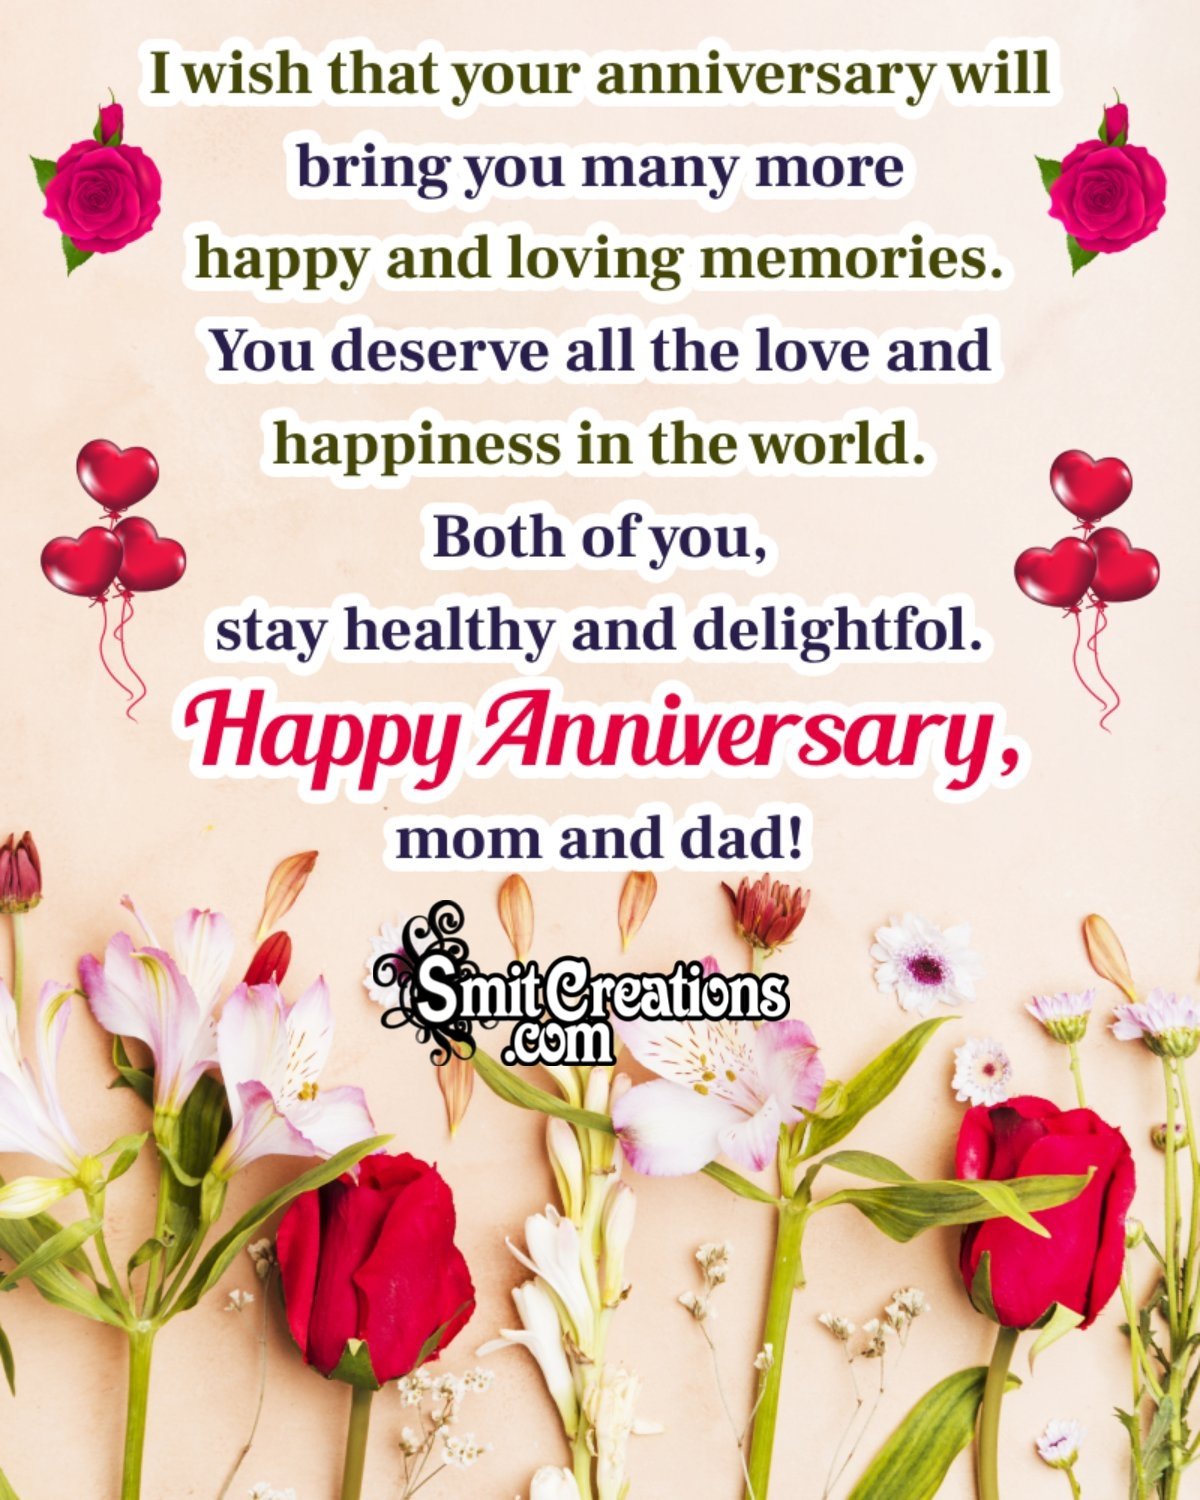 Happy Anniversary Wishes For Parents